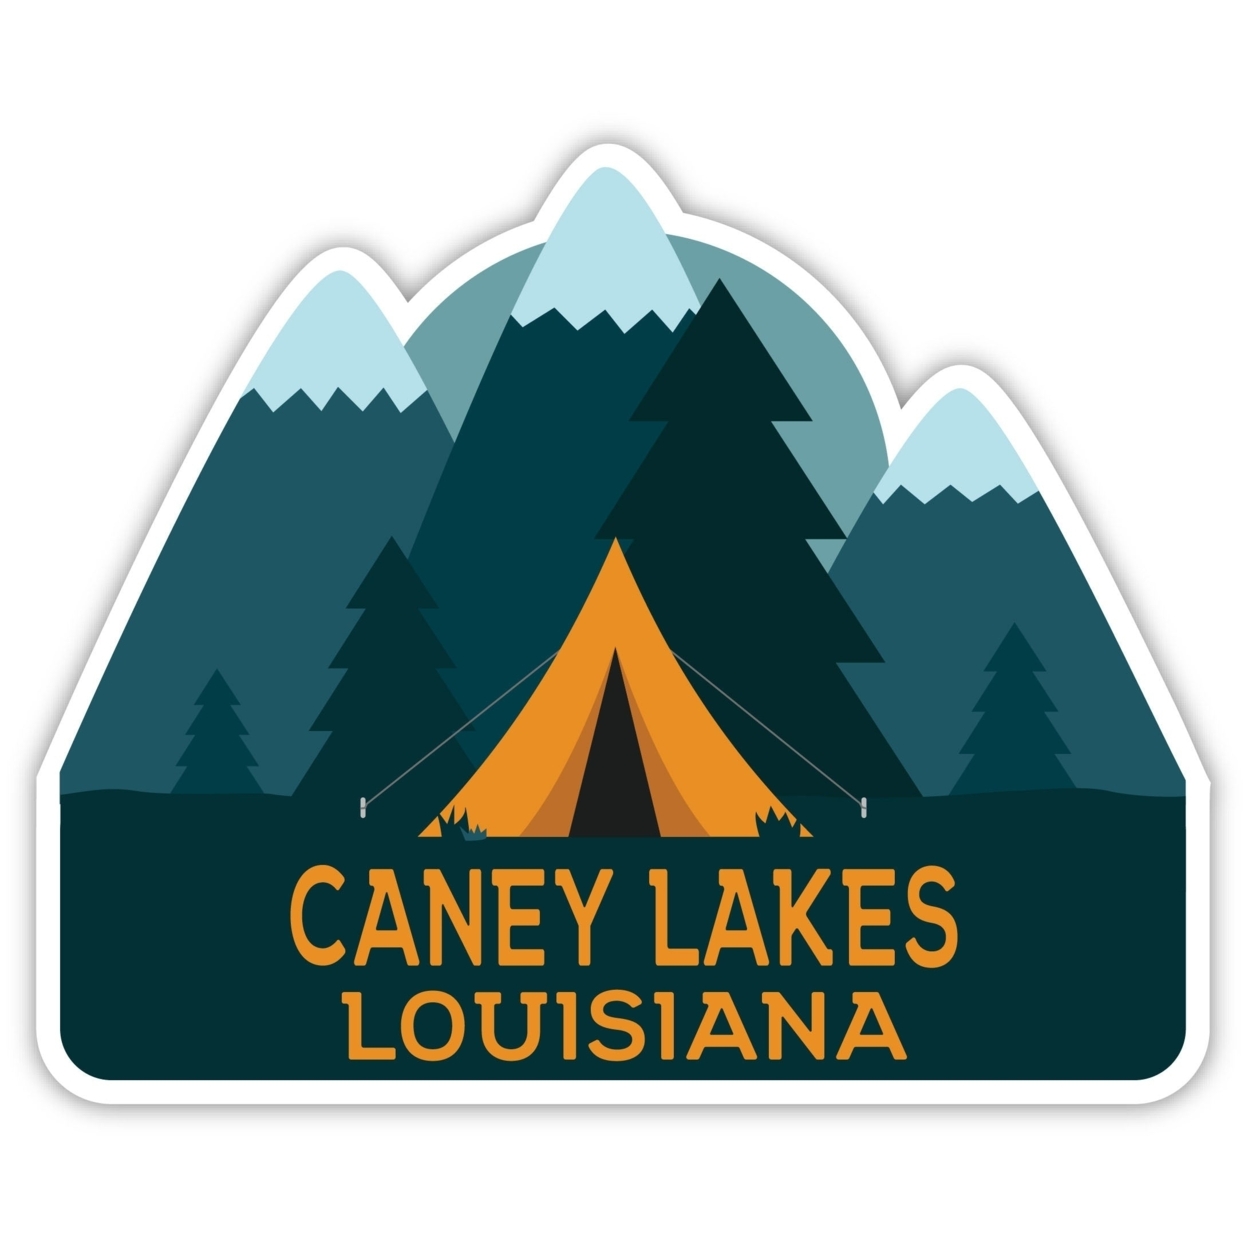 Caney Lakes Louisiana Souvenir Decorative Stickers (Choose Theme And Size) - 4-Pack, 4-Inch, Tent